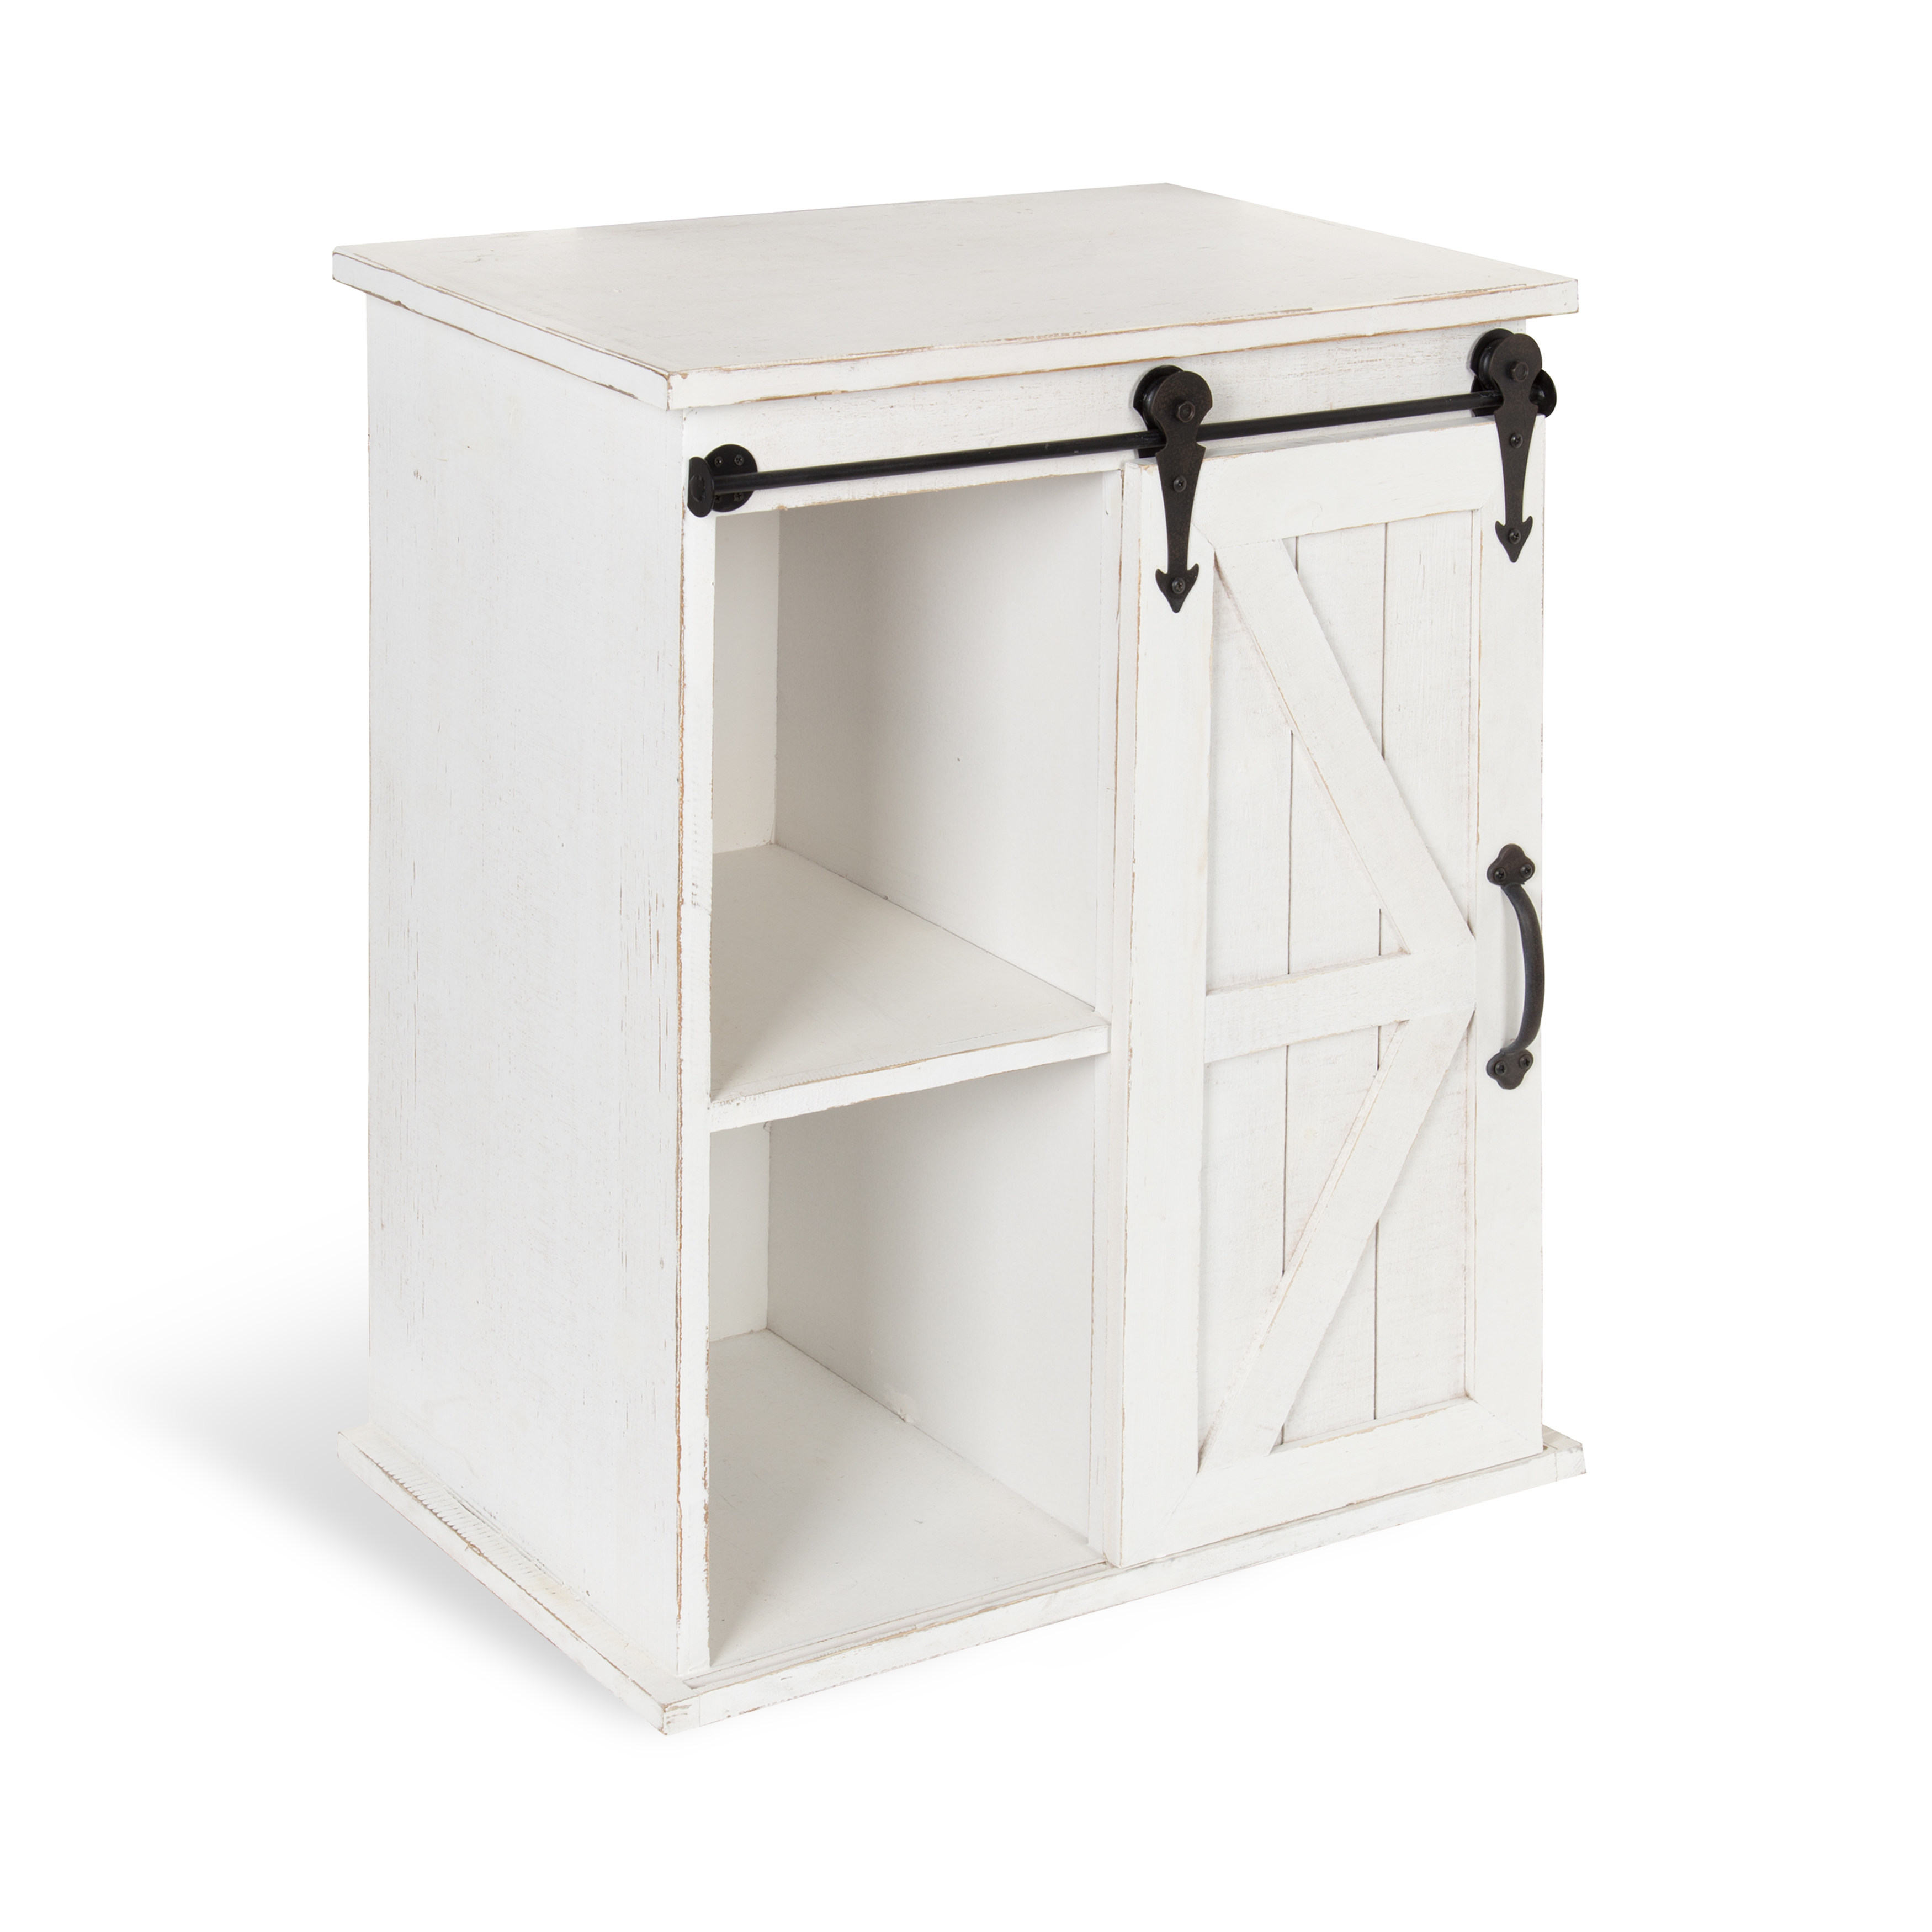 kate and laurel cates wooden freestanding storage cabinet side accent table with sliding barn door antique white finish tiffany furniture easy christmas runner patterns free small